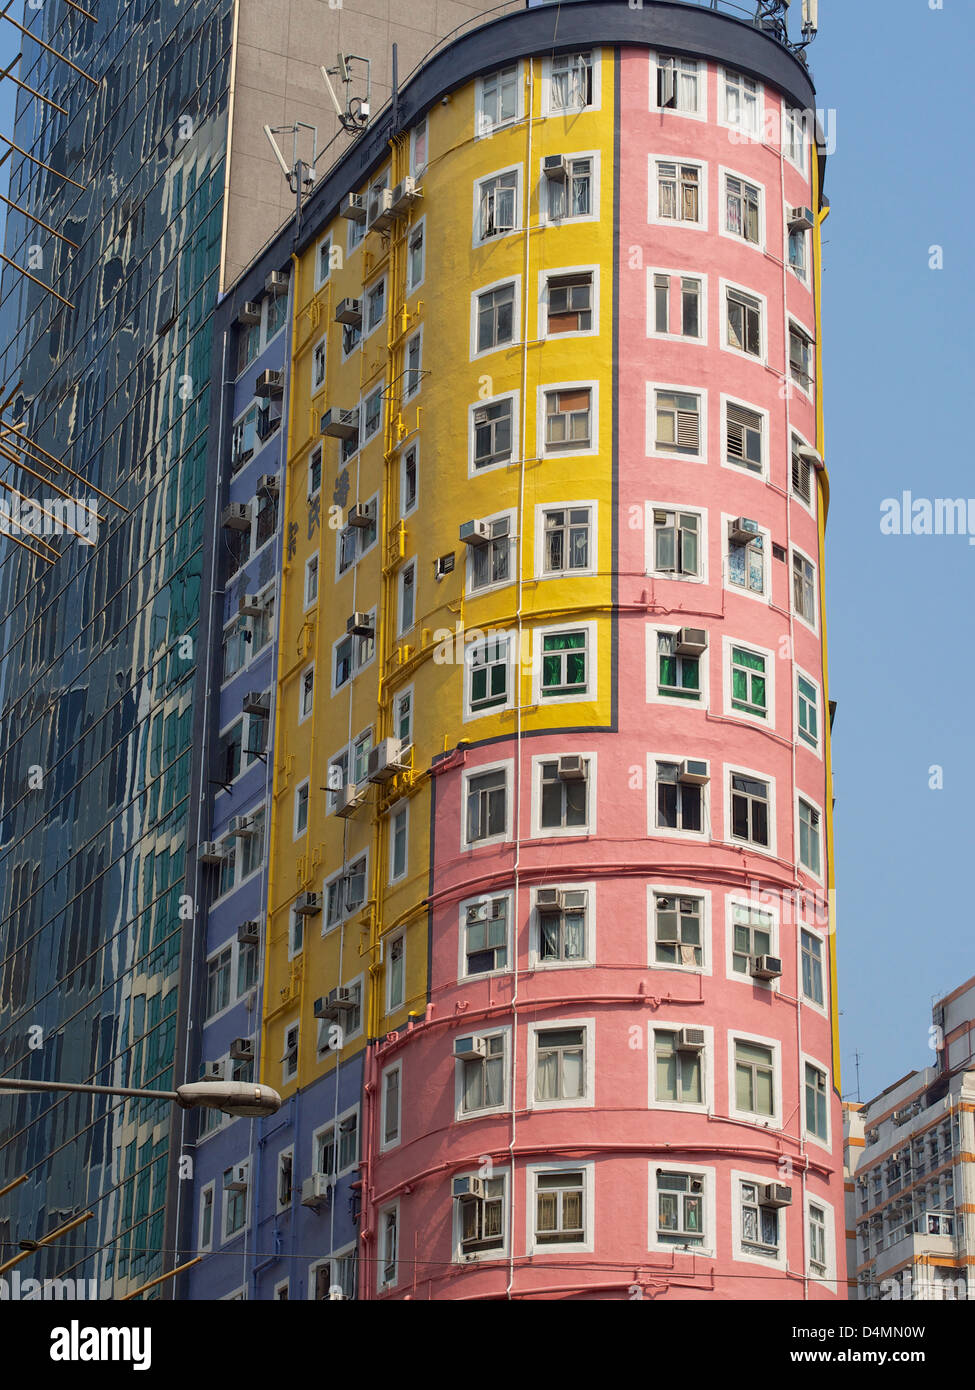 Newly redecorated building in Wan Chai Stock Photo - Alamy